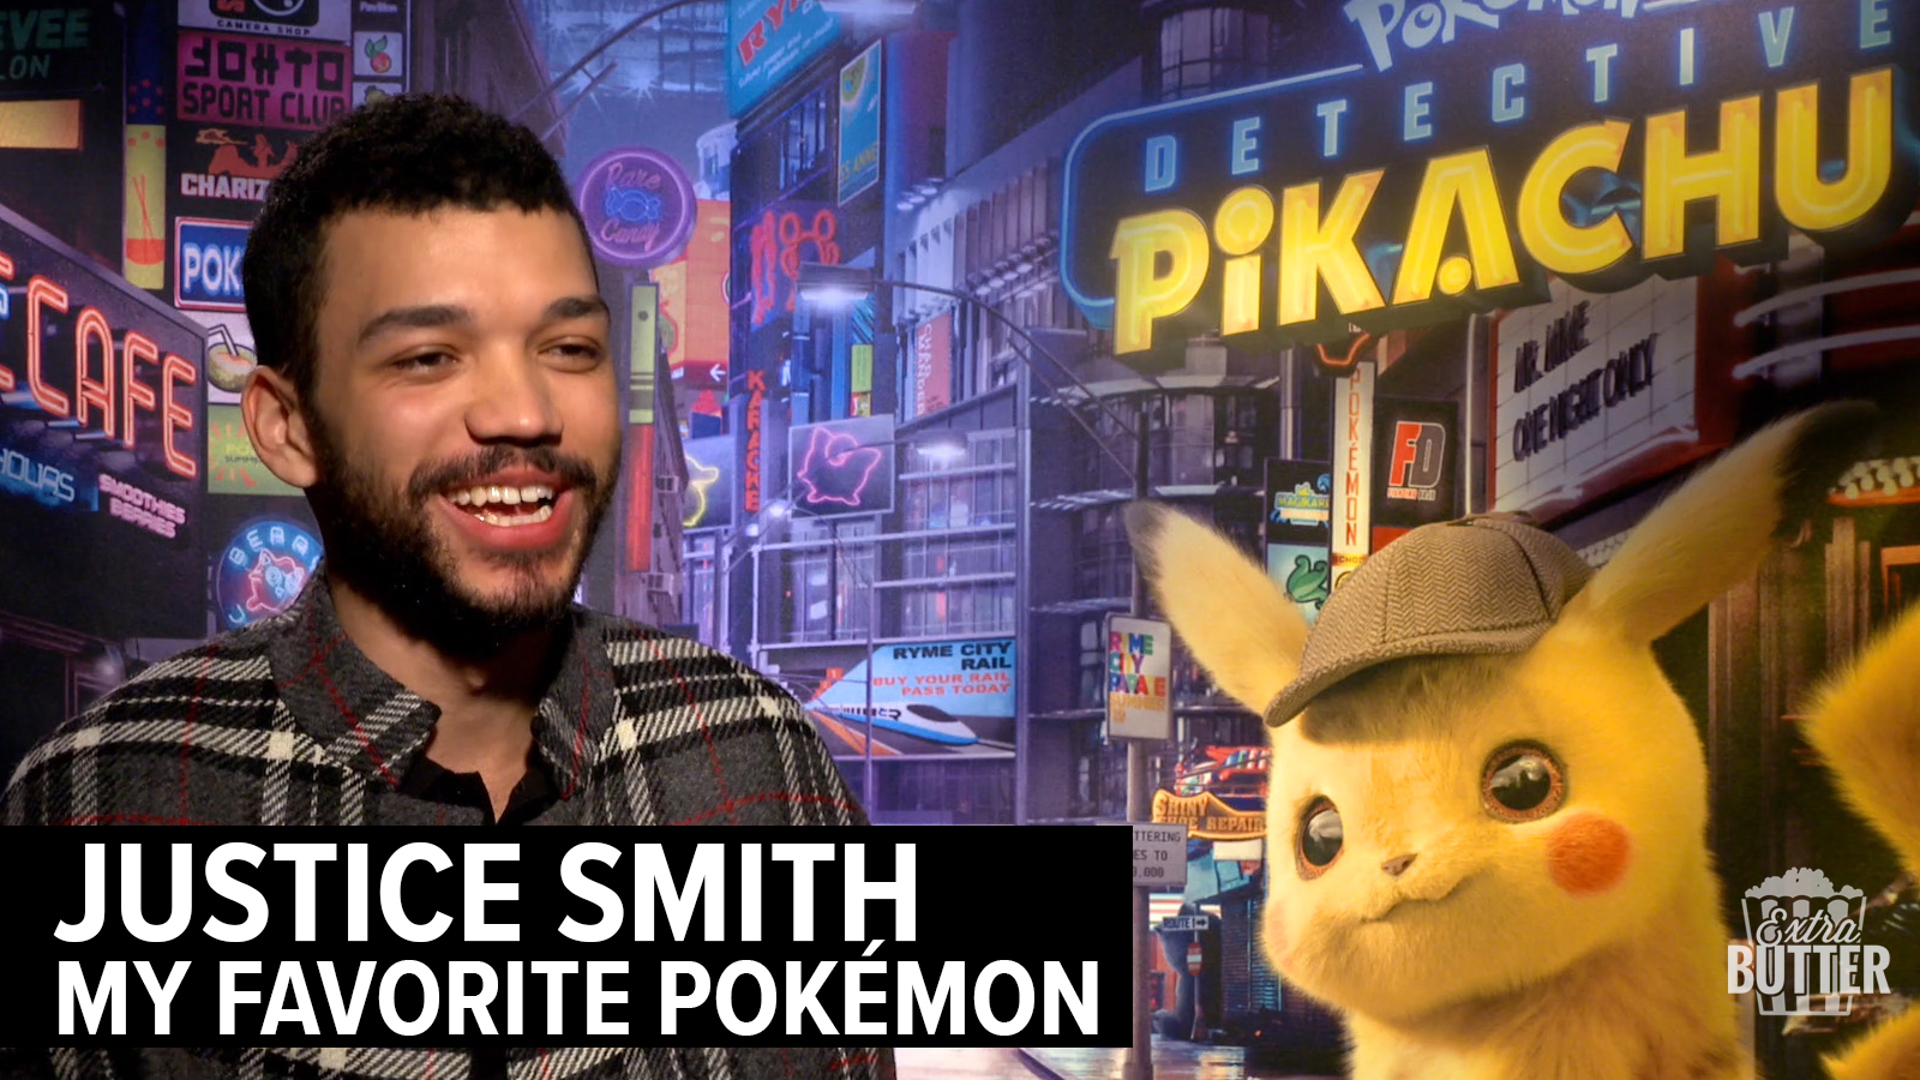 Justice Smith sits down with Mariaagloriaa to talk about the new Pokemon movie. Justice says he is a huge fan and reveals his favorite. Interview arranged by Warner Bros. Pictures.